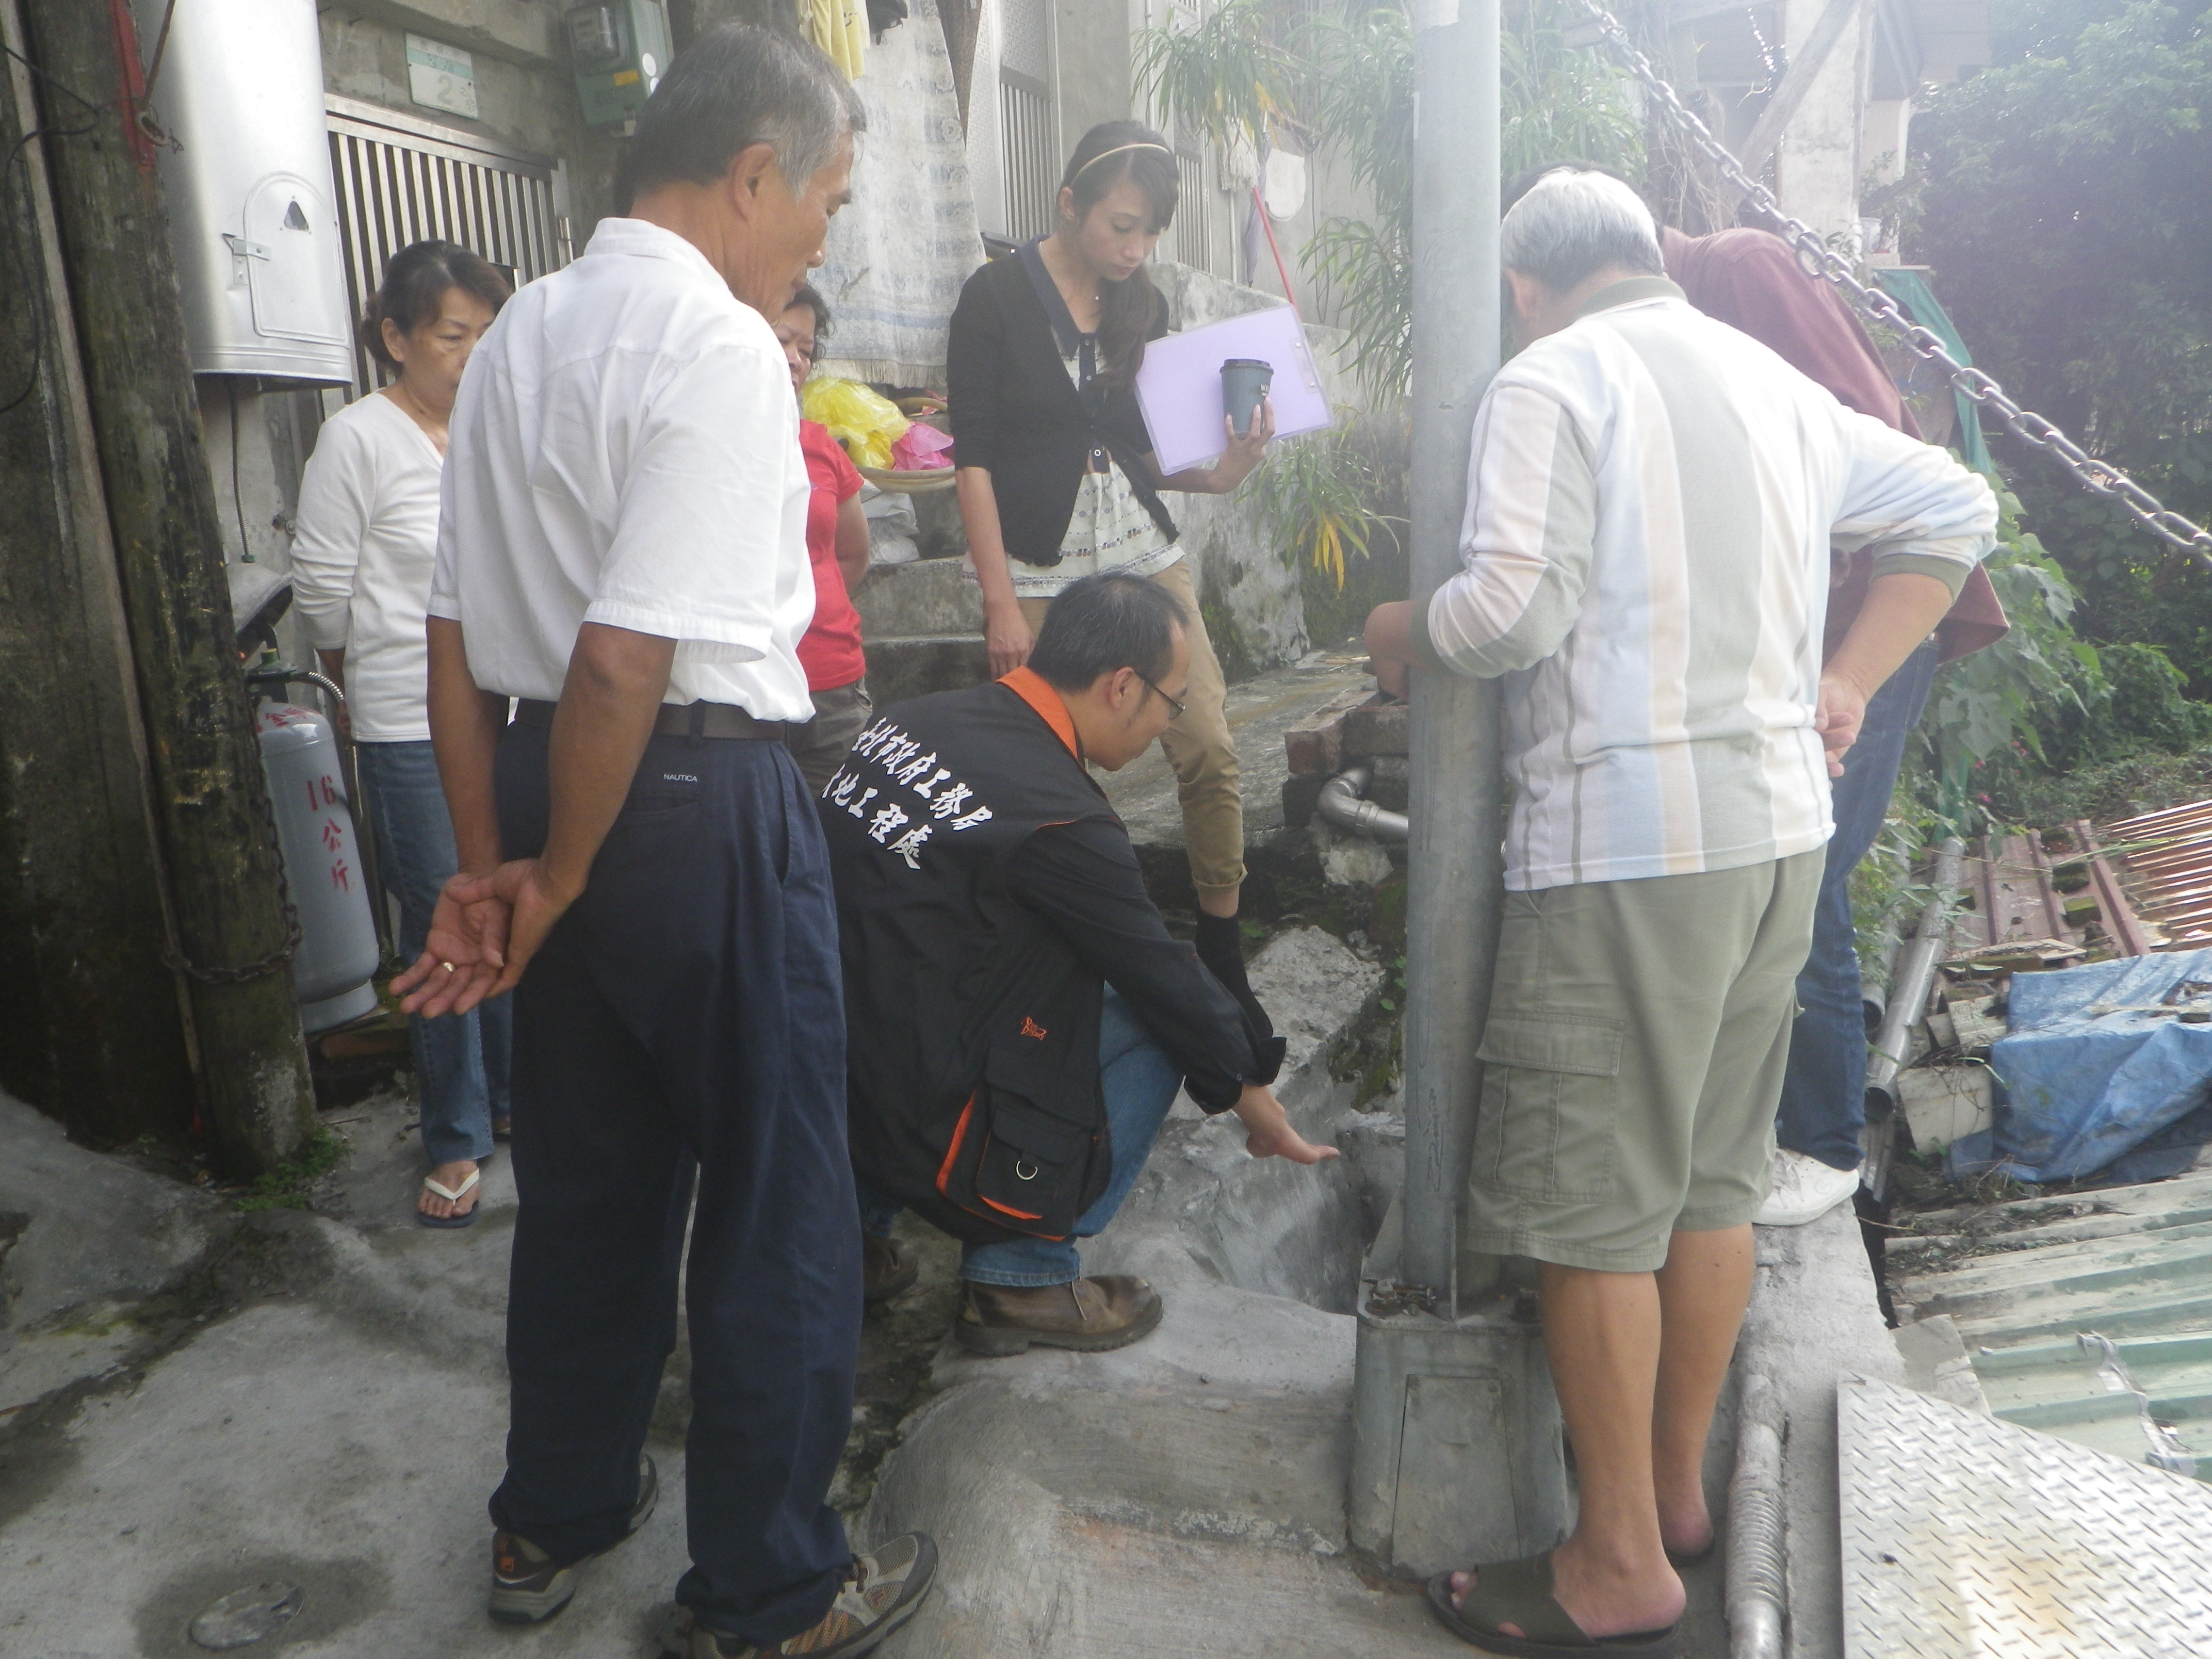 Photo 6: Joint inspections in the old hillside communities. Residents of the community shared the hillside situations in their community